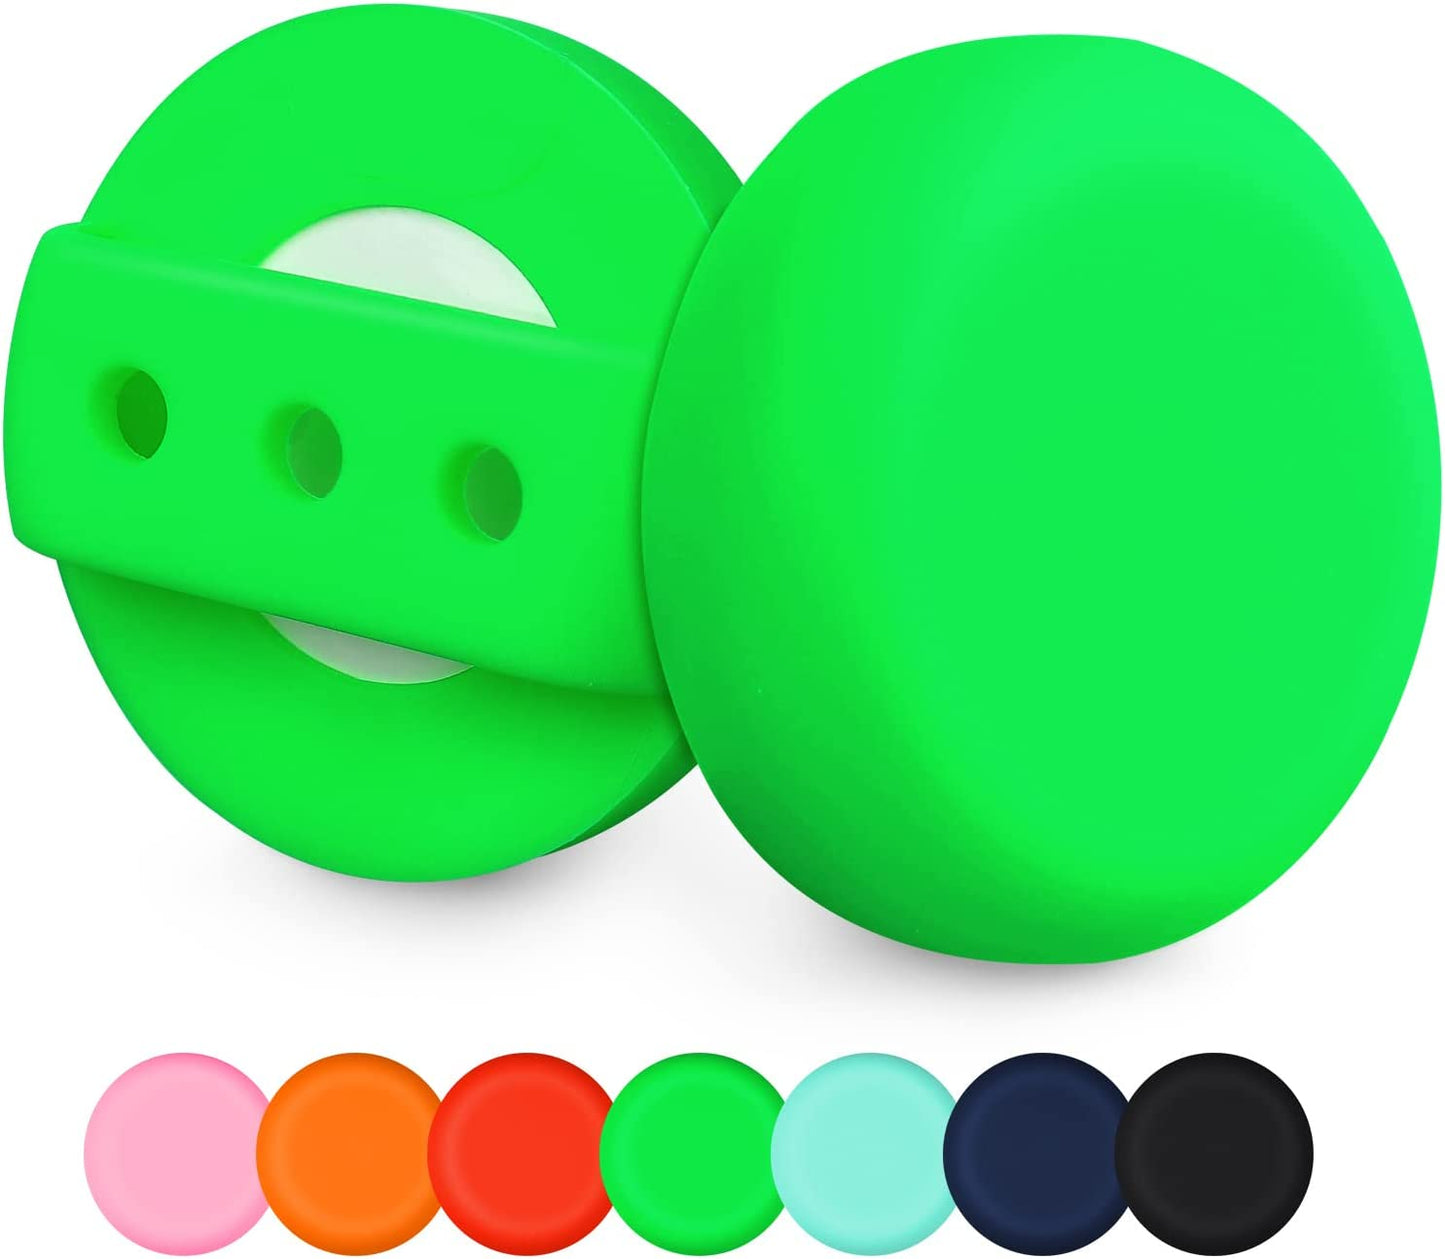 MOOGROU Airtag Dog Collar Holder 2 Pack,Newest Premium Protective Case for Apple Air Tag Tracker,Lightweight Silicone Airtag Case for Cat Collar Pet Loops,Waterproof Airtag.Dog Collar Holder Pink S Electronics > GPS Accessories > GPS Cases MOOGROU Green+Green L-3/4" 1" 